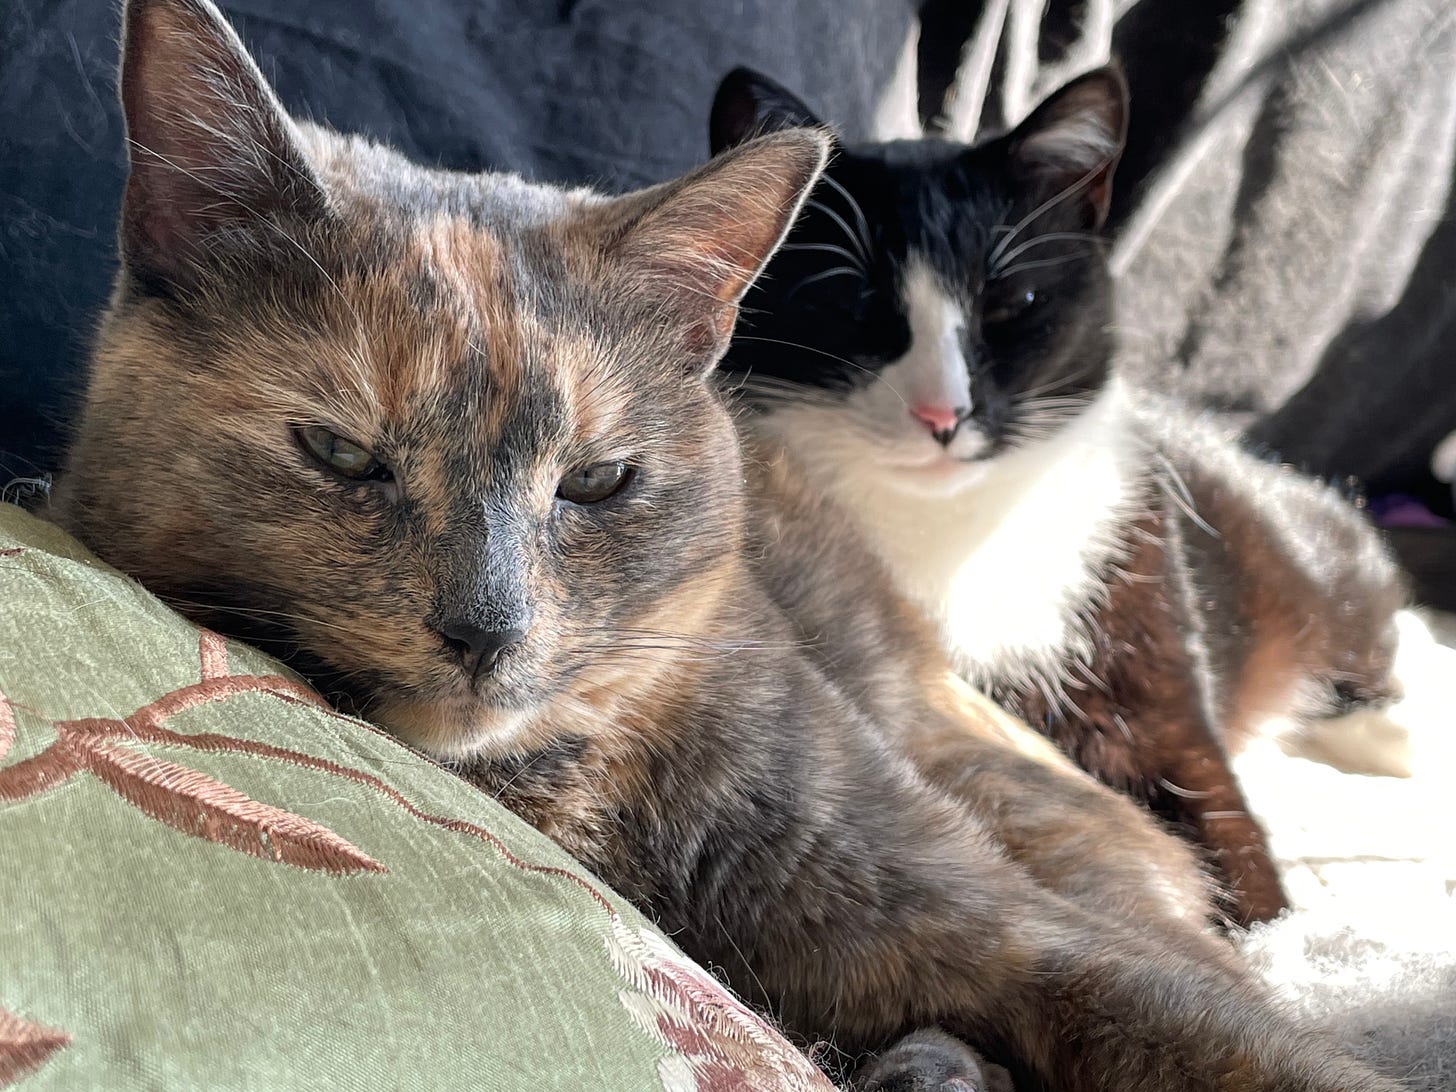 Two cats are shown reclining on a sofa. In the foreground, a dilute tortoiseshell cat is leaning against a green pillow, looking directly into the camera. In the background, slightly out of focus, a tuxedo cat with a black-and-pink nose is also looking toward the photographer.